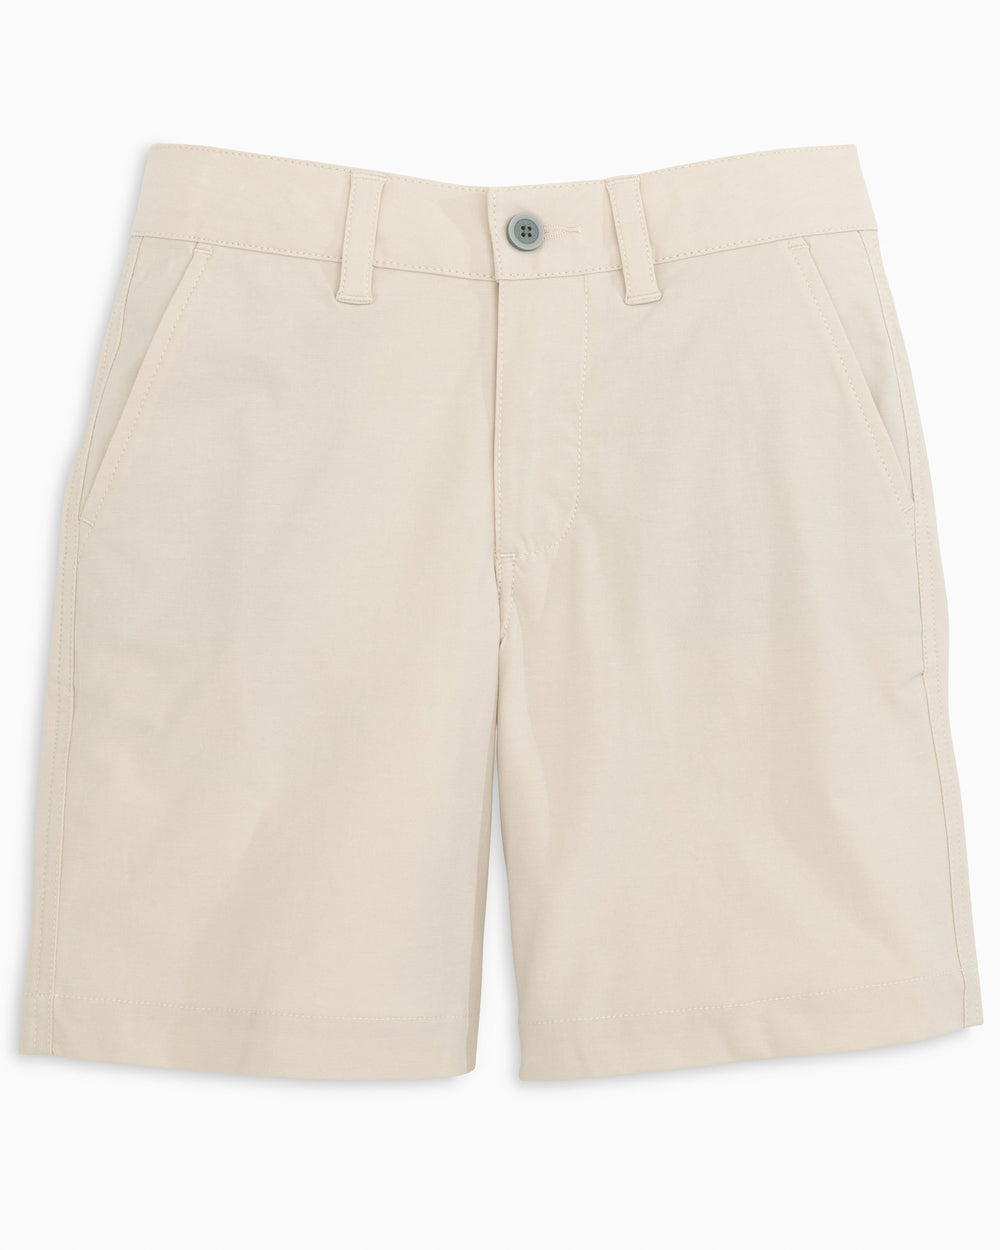 The front view of the Kid's T3 Gulf Short by Southern Tide - Stone